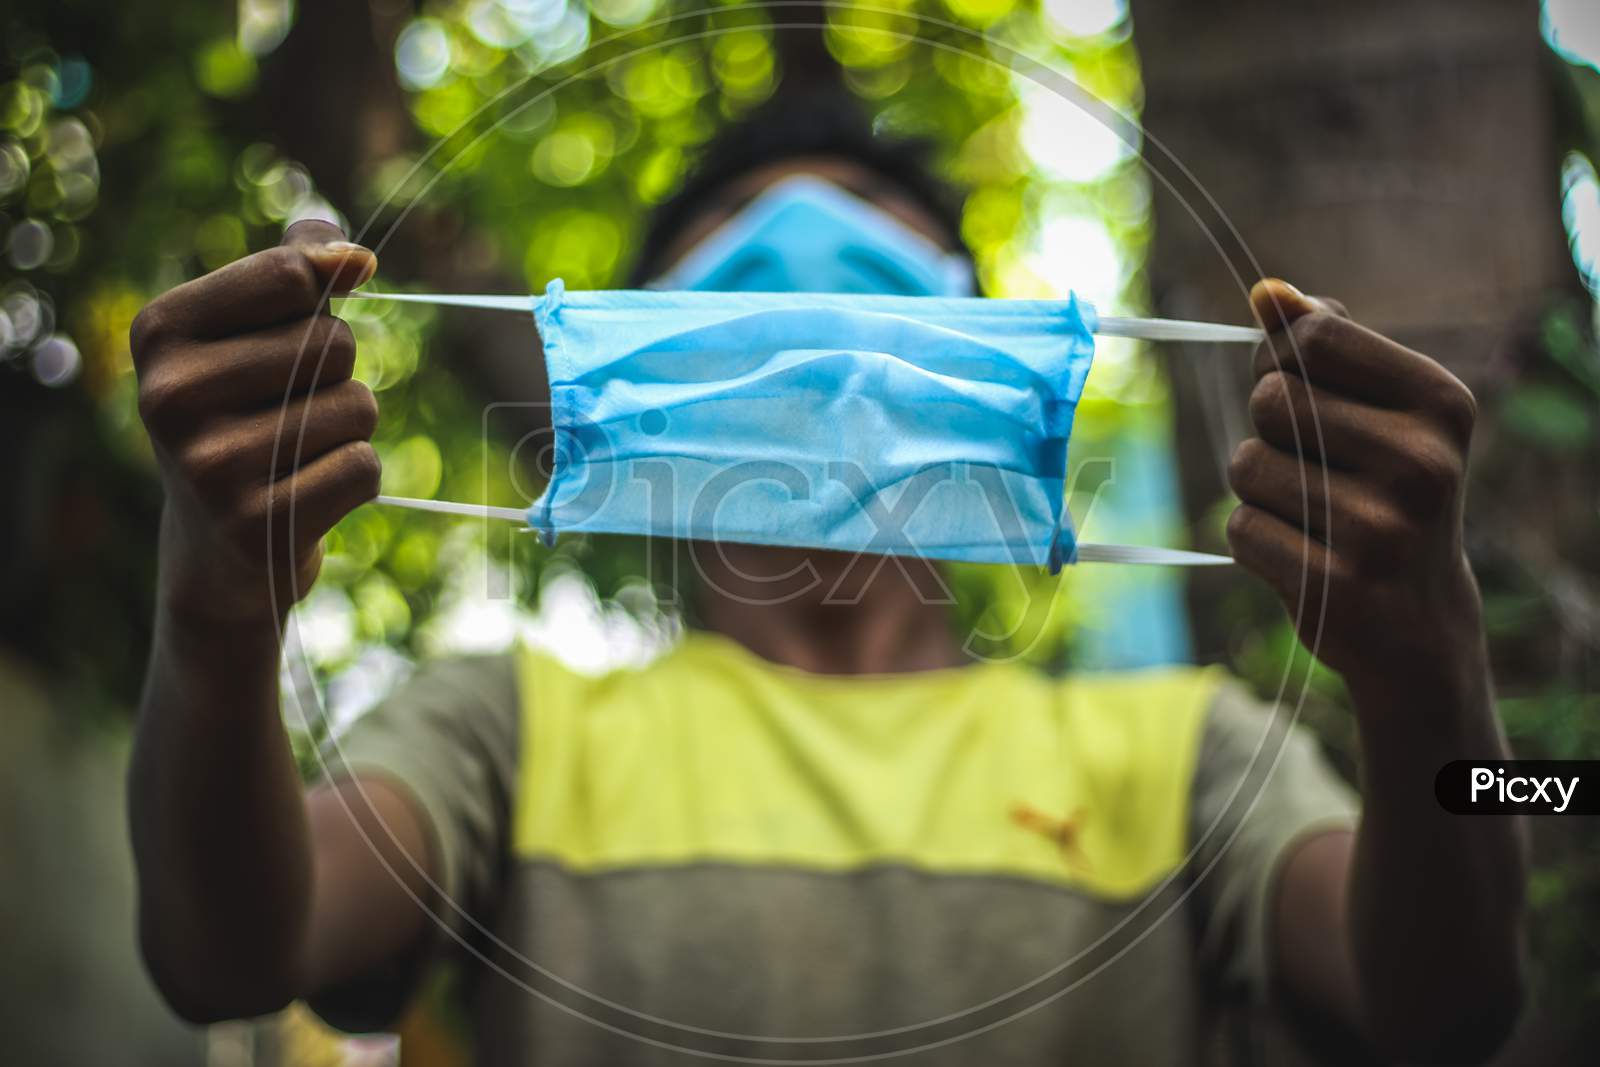 Protection Against Contagious Disease, Coronavirus. Man Wearing Hygienic Mask And Holding On His Hand To Prevent Infection, Airborne Respiratory Illness Such As Flu, 2020. Outdoor Shot Isolated On Nature Background. Asian Young Man Wearing Blue Mask